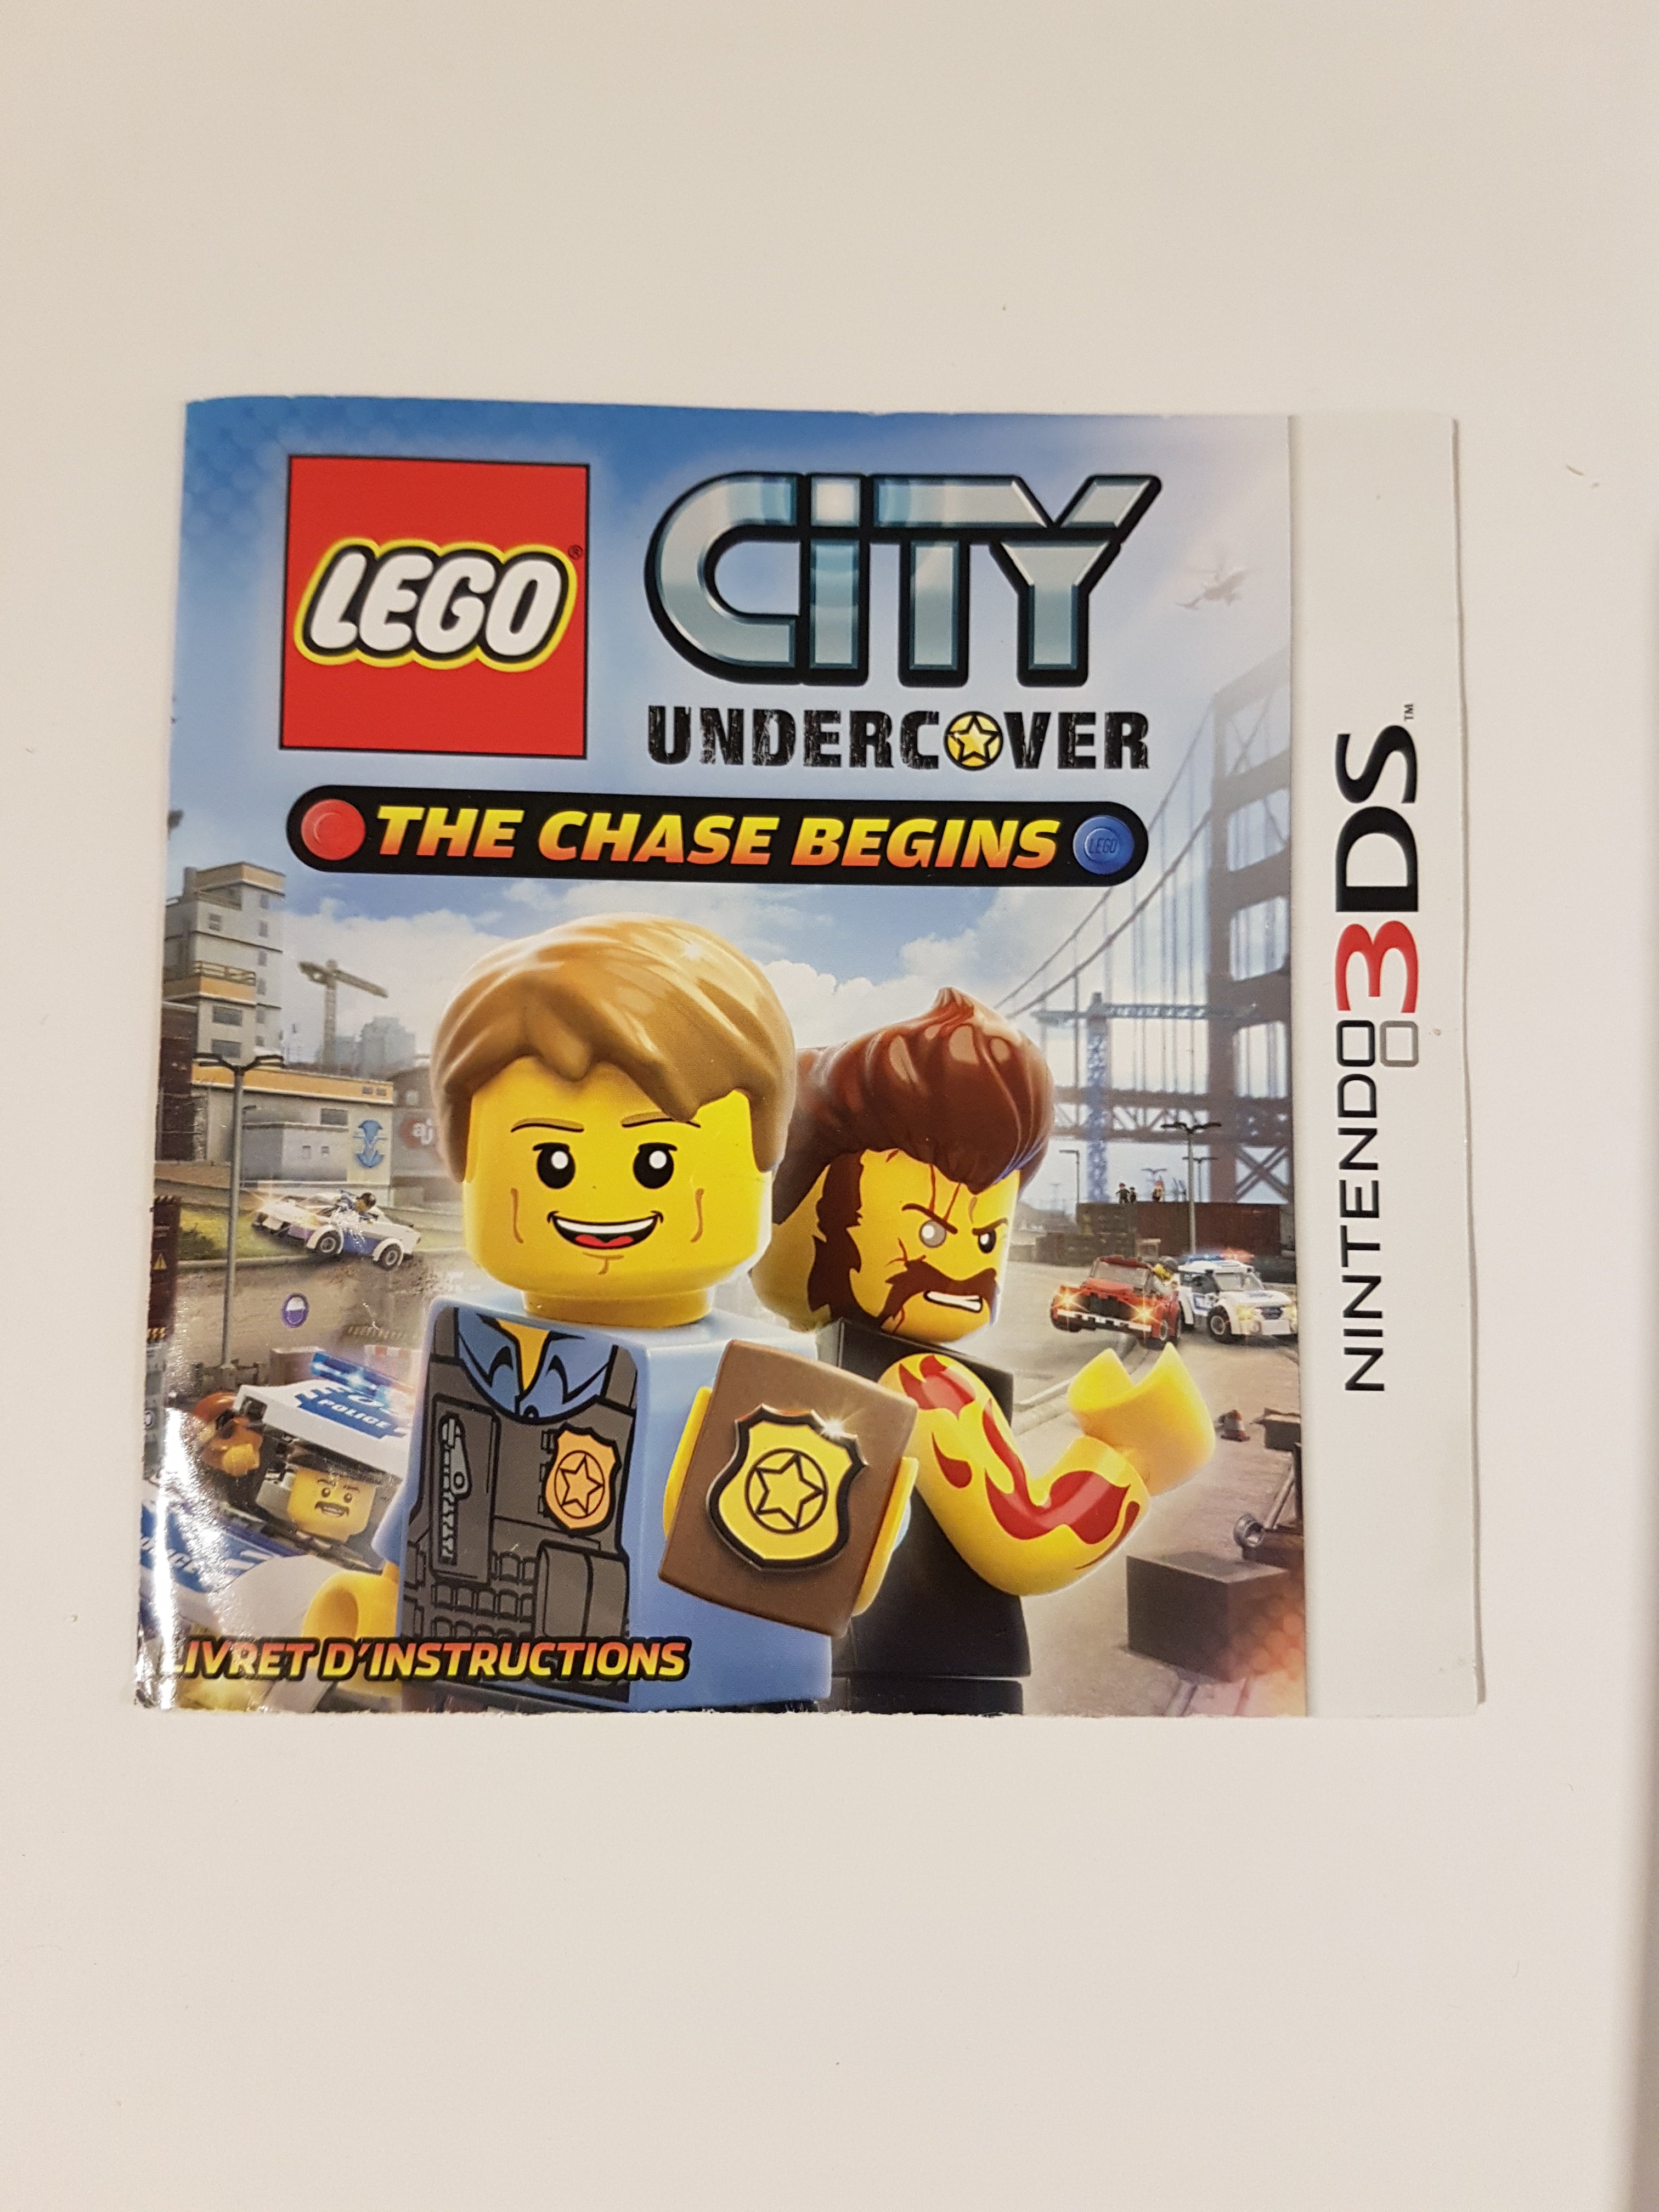 JEU LEGO CITY UNDERCOVER THE CHASE BEGINS 3DS 